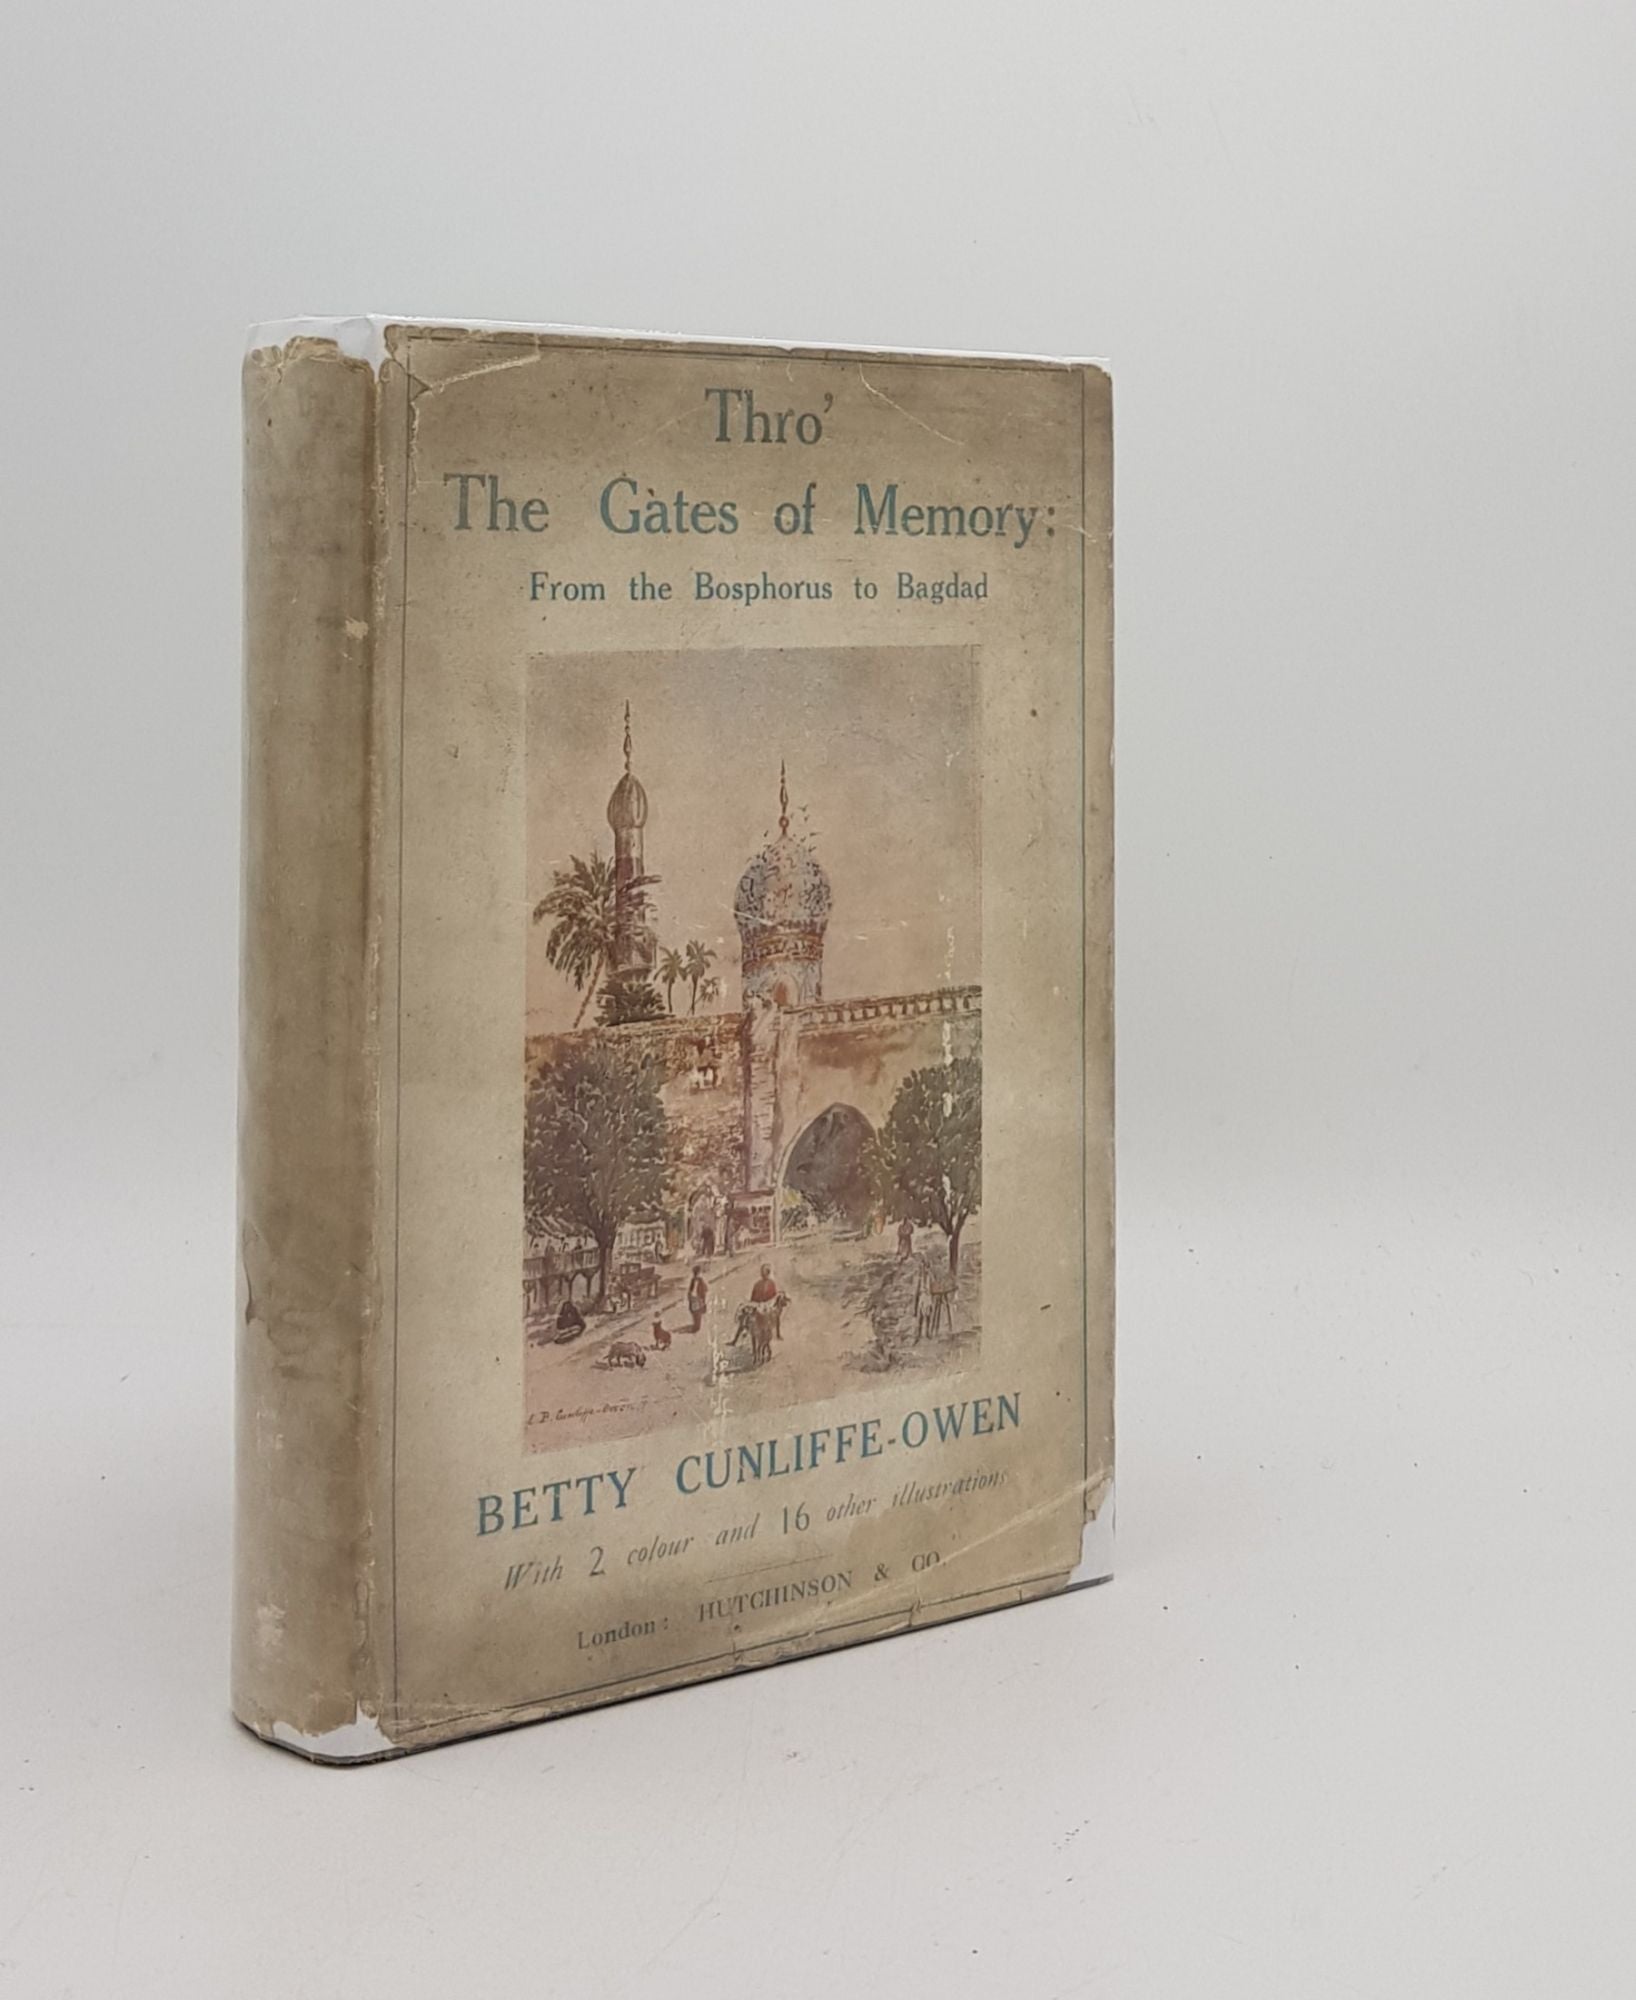 CUNLIFFE-OWEN Betty - Thro the Gates of Memory from Bosphorus to Baghdad